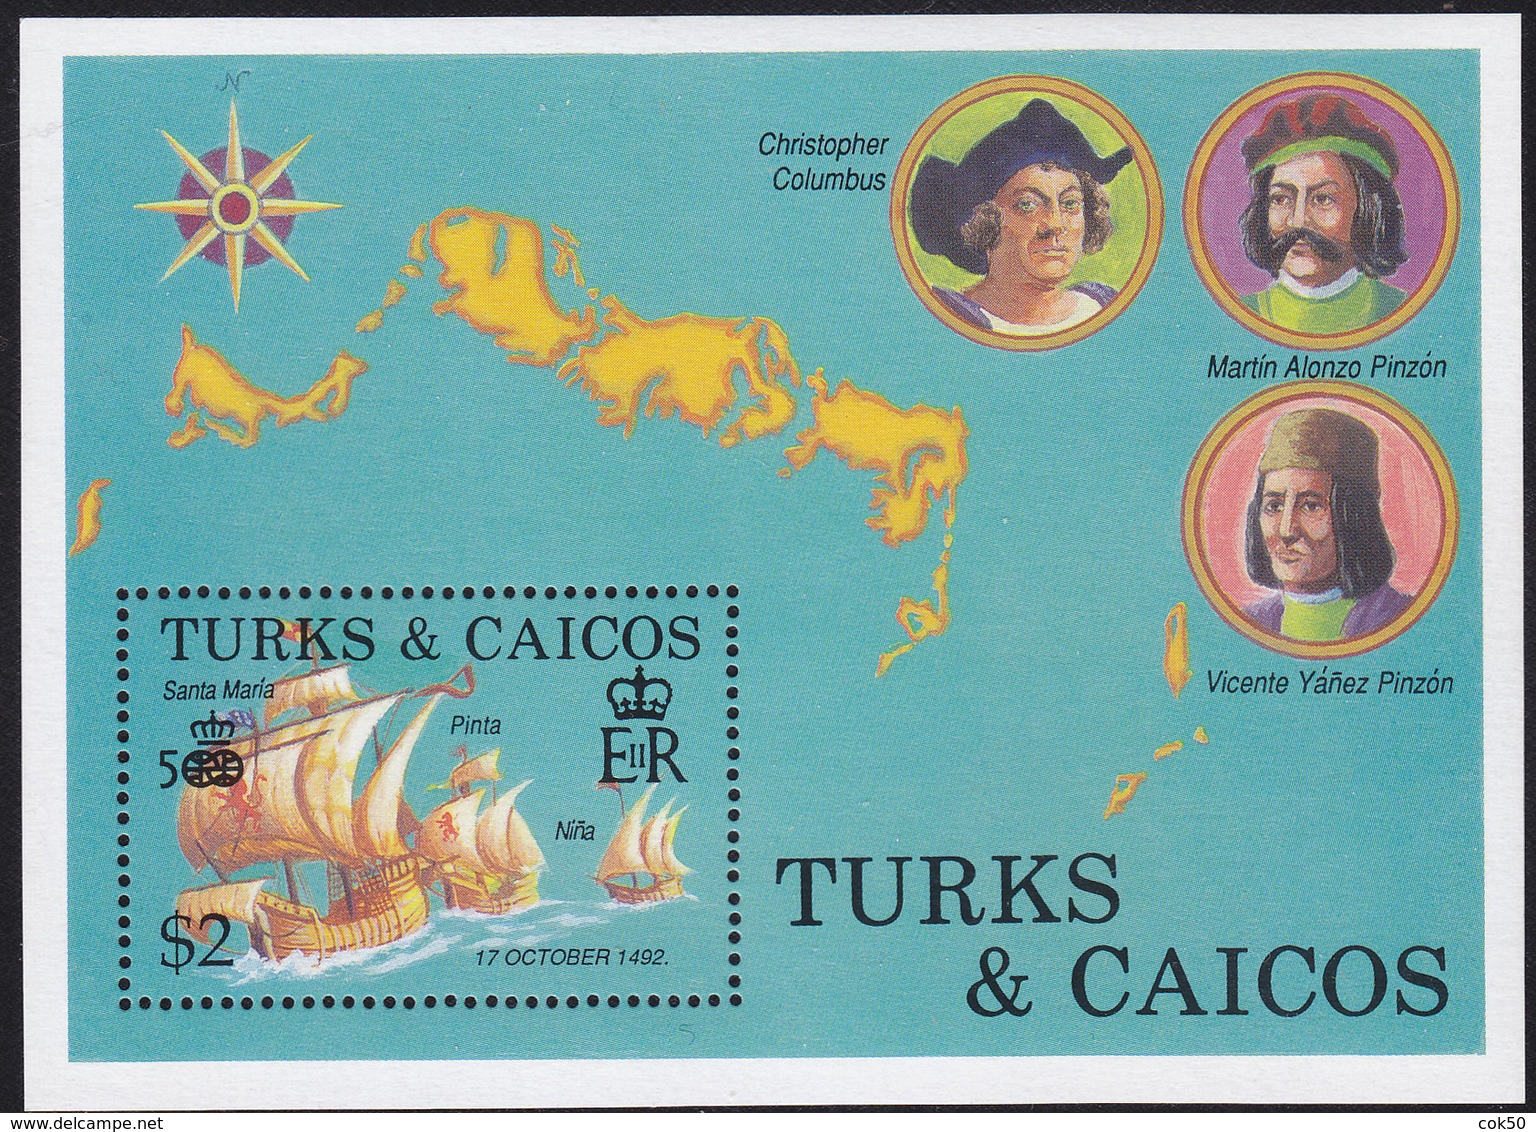 TURKS AND CAICOS 1992, Anniv. Coins For The 500th Year Jub. For Discovery Of America MNH, Mi# Bl.118 - Turcas Y Caicos